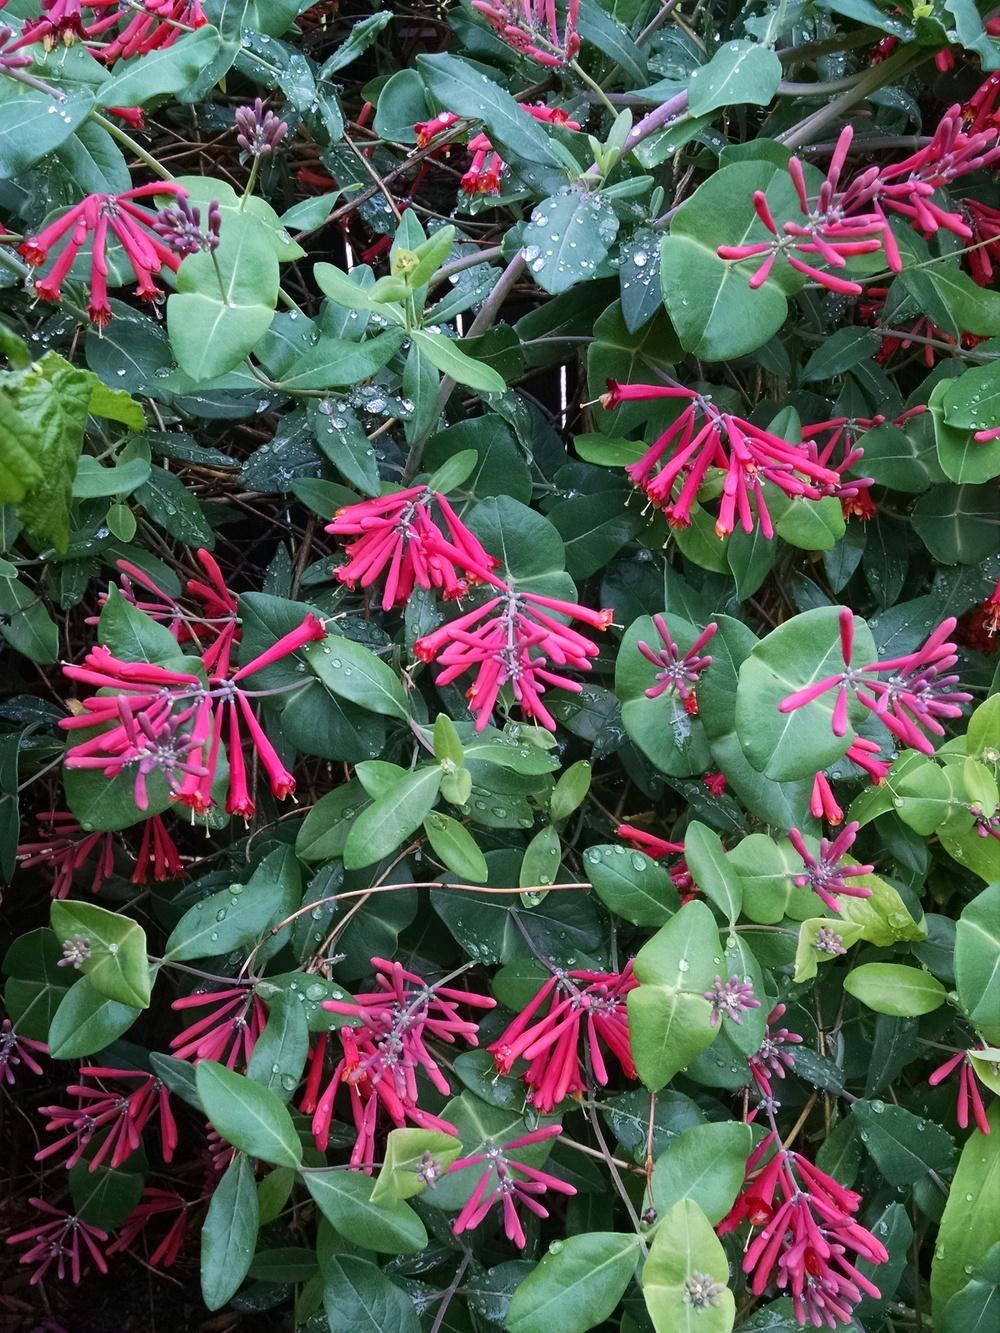 Photo of Coral Honeysuckle (Lonicera sempervirens 'Major Wheeler') uploaded by Catmint20906